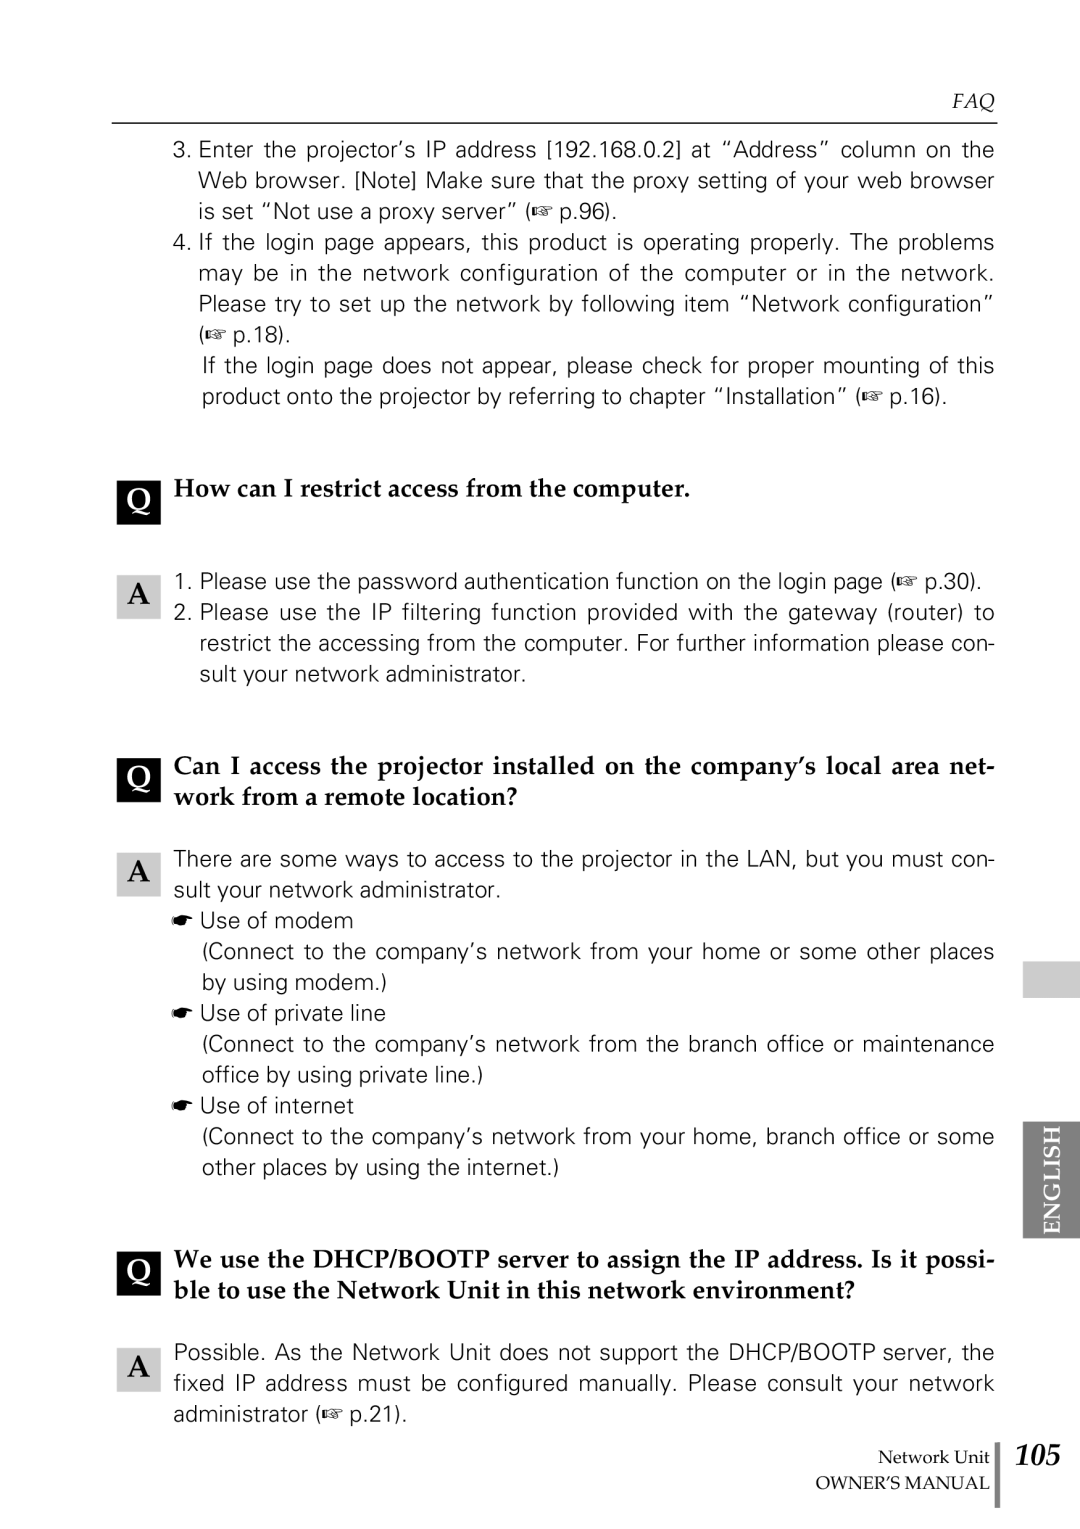 Eiki PjNET-20 owner manual Q How can I restrict access from the computer 